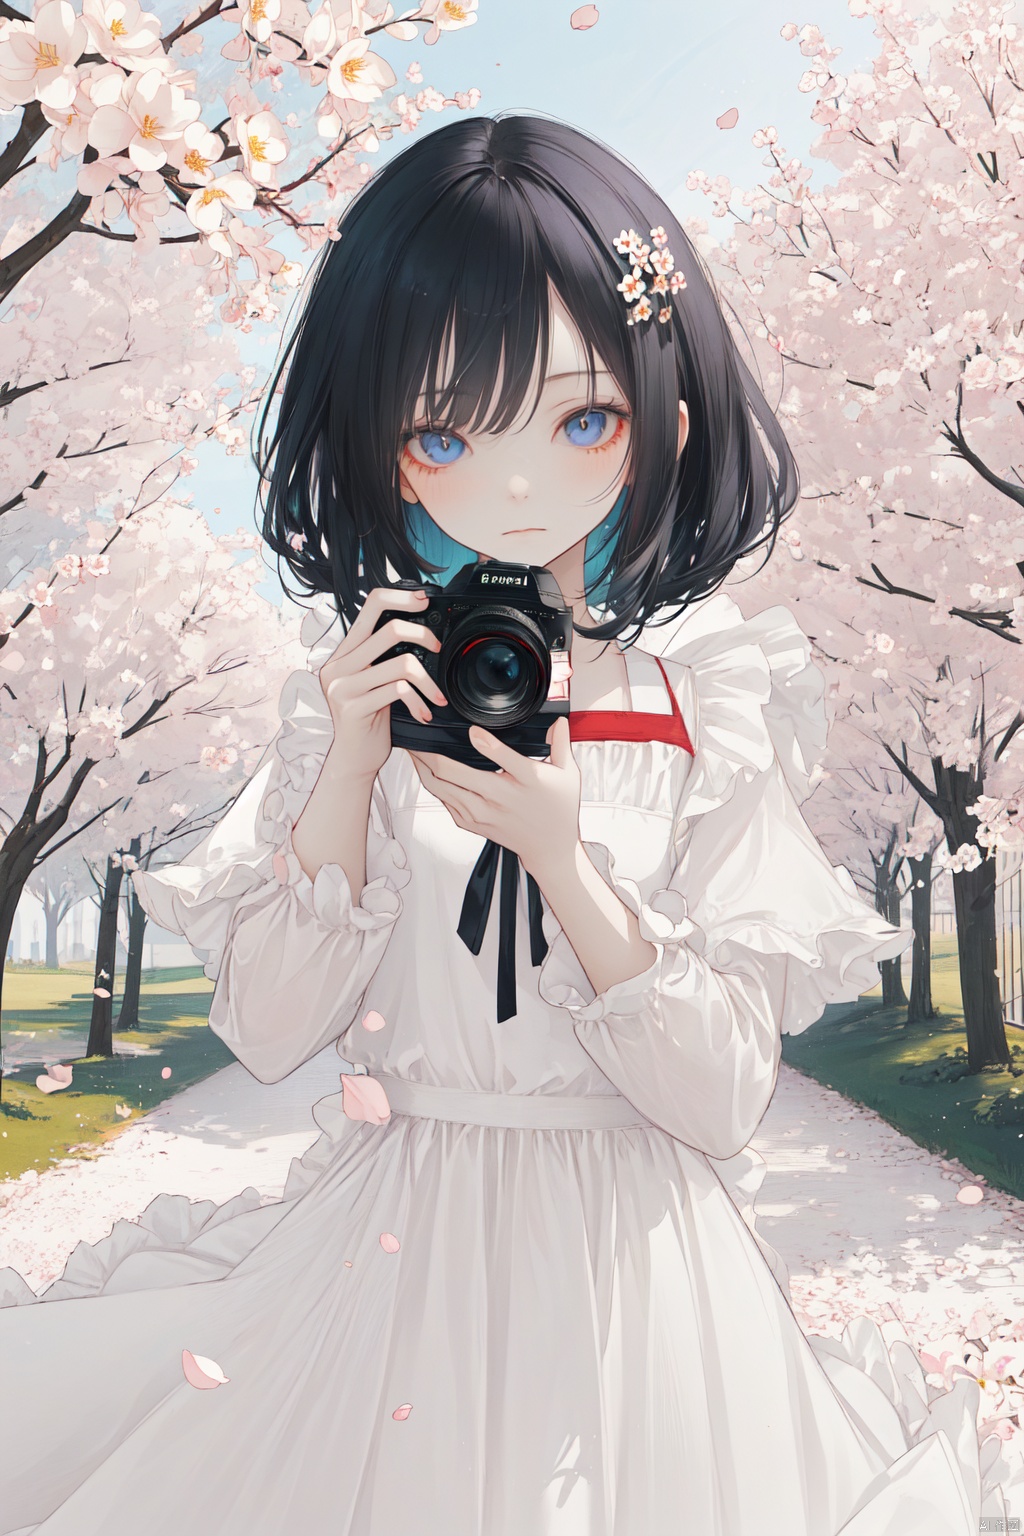 The image features a beautiful anime girl dressed in a flowing white and red dress, standing amidst a flurry of red cherry blossoms. The contrast between her white dress and the red flowers creates a striking visual effect. The lighting in the image is well-balanced, casting a warm glow on the girl and the surrounding flowers. The colors are vibrant and vivid, with the red cherry blossoms standing out against the white sky. The overall style of the image is dreamy and romantic, perfect for a piece of anime artwork. The quality of the image is excellent, with clear details and sharp focus. The girl's dress and the flowers are well-defined, and the background is evenly lit, without any harsh shadows or glare. From a technical standpoint, the image is well-composed, with the girl standing in the center of the frame, surrounded by the blossoms. The use of negative space in the background helps to draw the viewer's attention to the girl and the flowers. The cherry blossoms, often associated with transience and beauty, further reinforce this theme. The girl, lost in her thoughts, seems to be contemplating the fleeting nature of beauty and the passage of time. Overall, this is an impressive image that showcases the photographer's skill in capturing the essence of a scene, as well as their ability to create a compelling narrative through their art.catgirl,loli